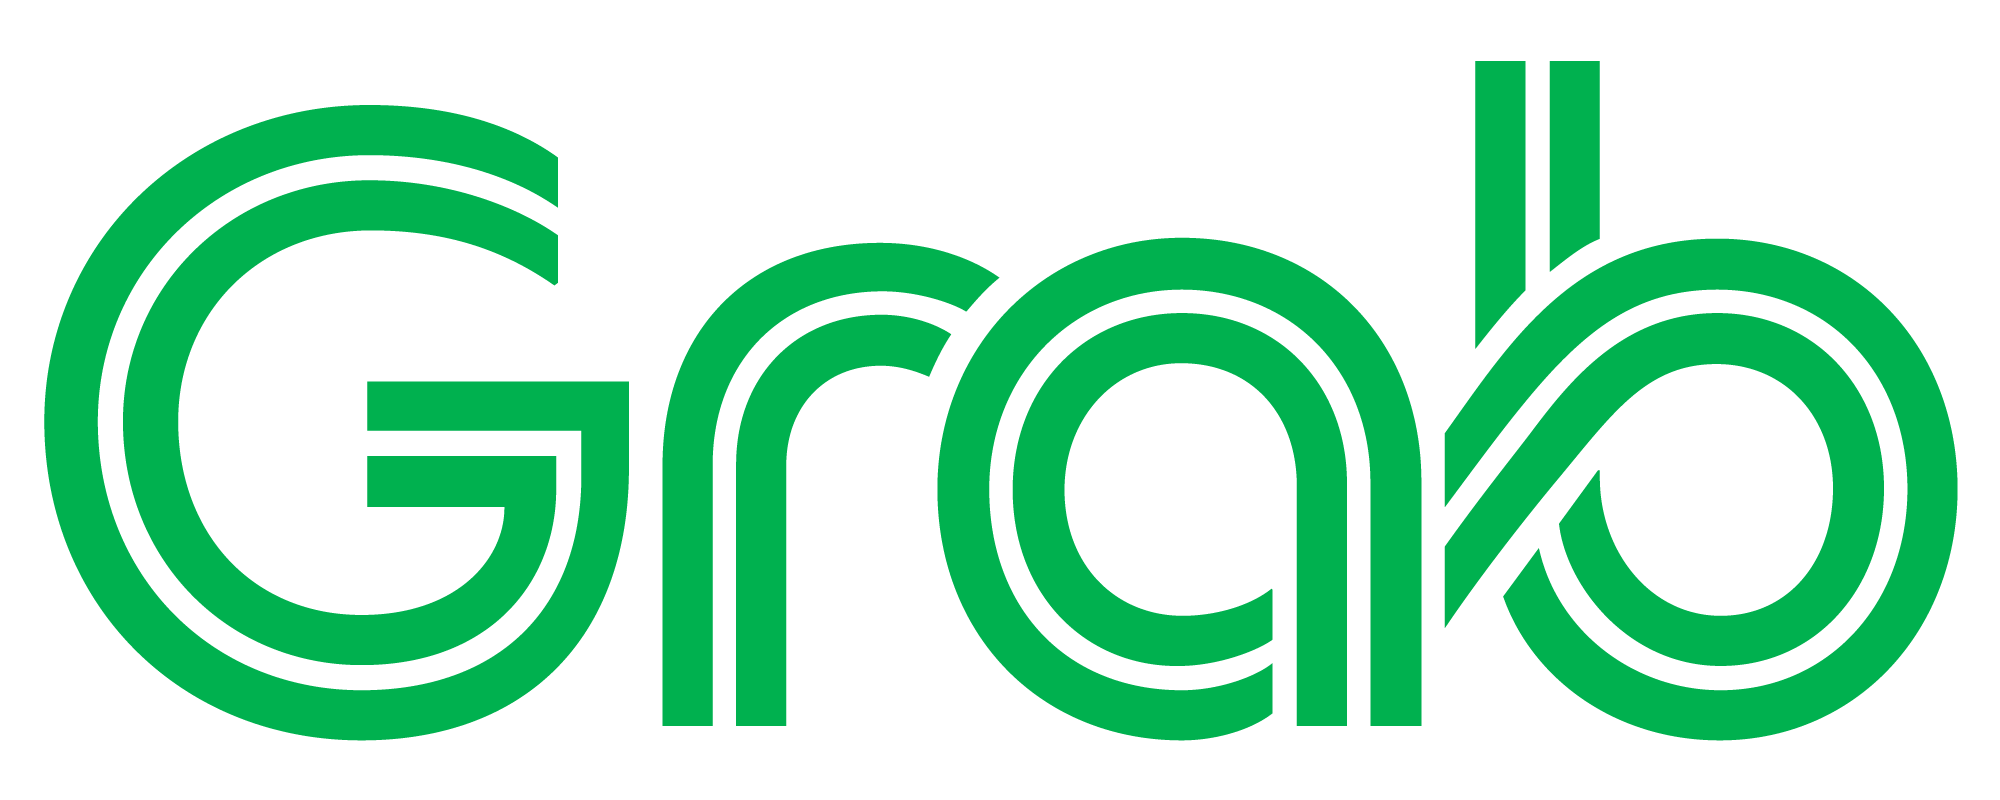 Grab Hires Peter Oey as Chief Financial Officer | Grab SG